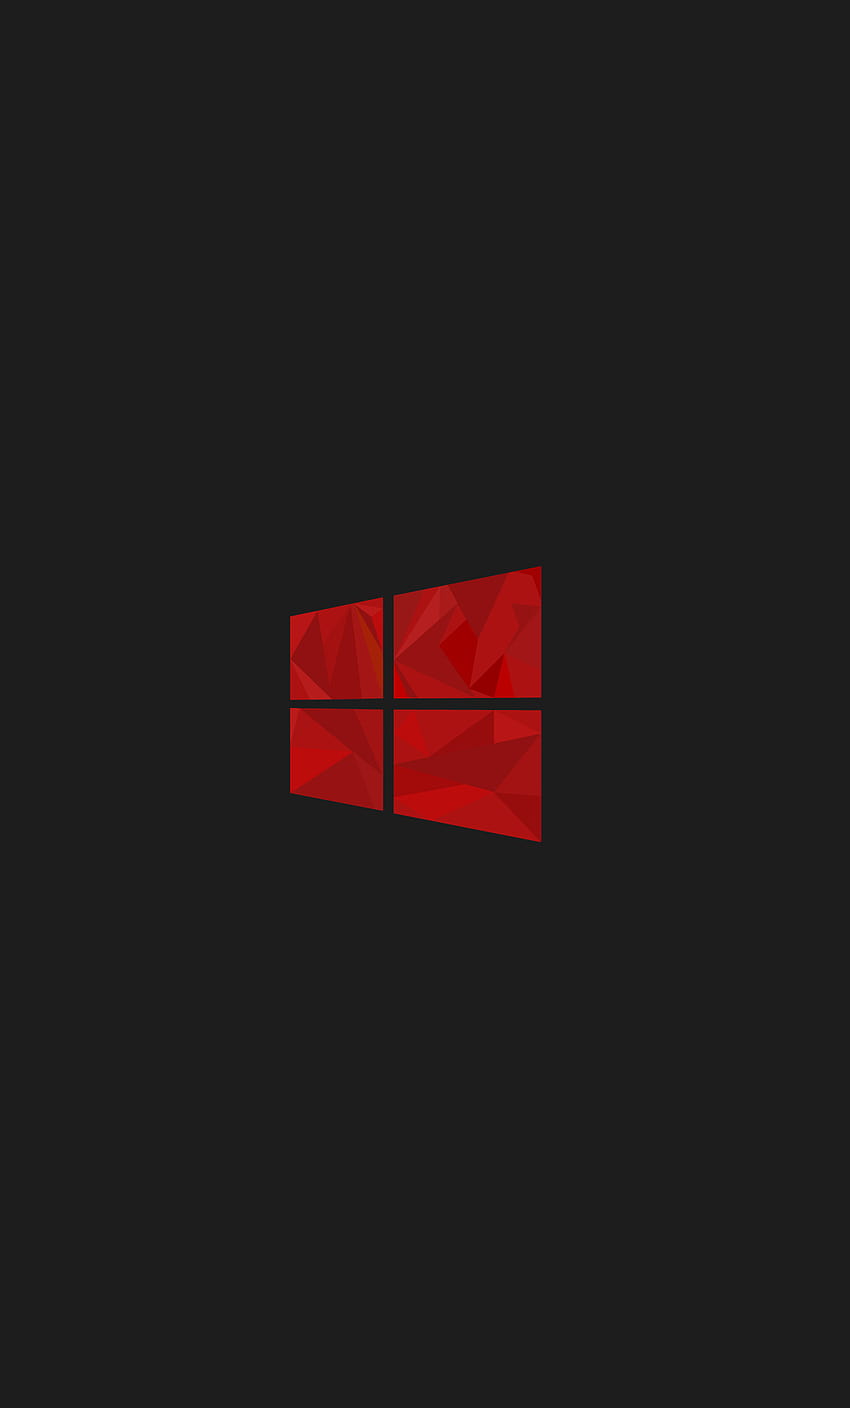 1280x2120 Windows 10 Red Minimal Simple Logo iPhone , Backgrounds, and HD phone wallpaper